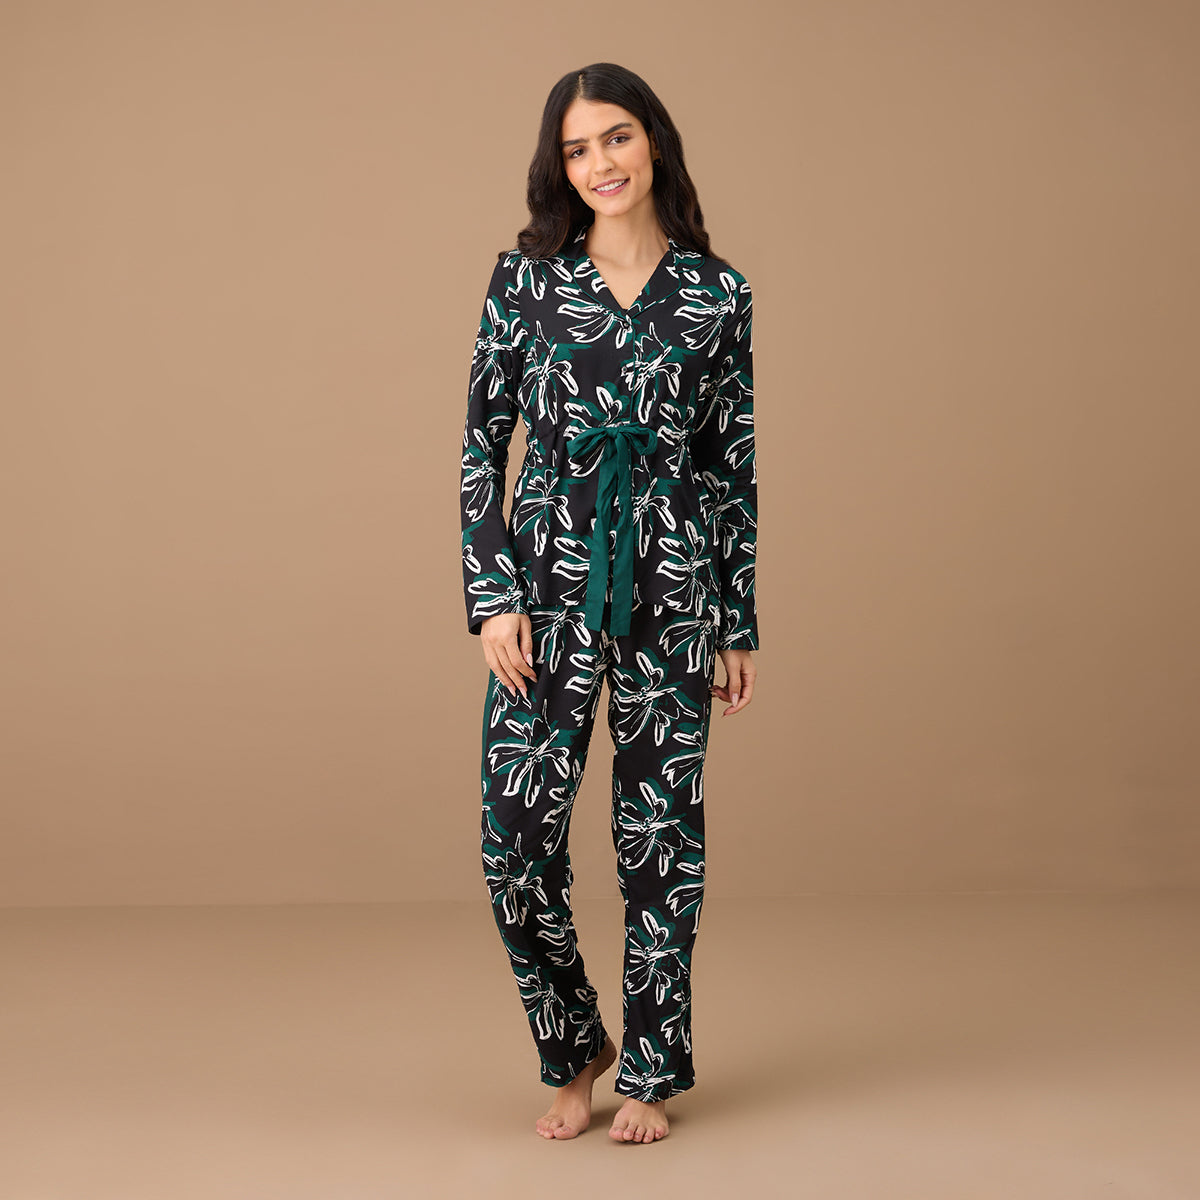 Nykd By Nykaa Style Me Up Rayon Set - NYS904 - Green Print